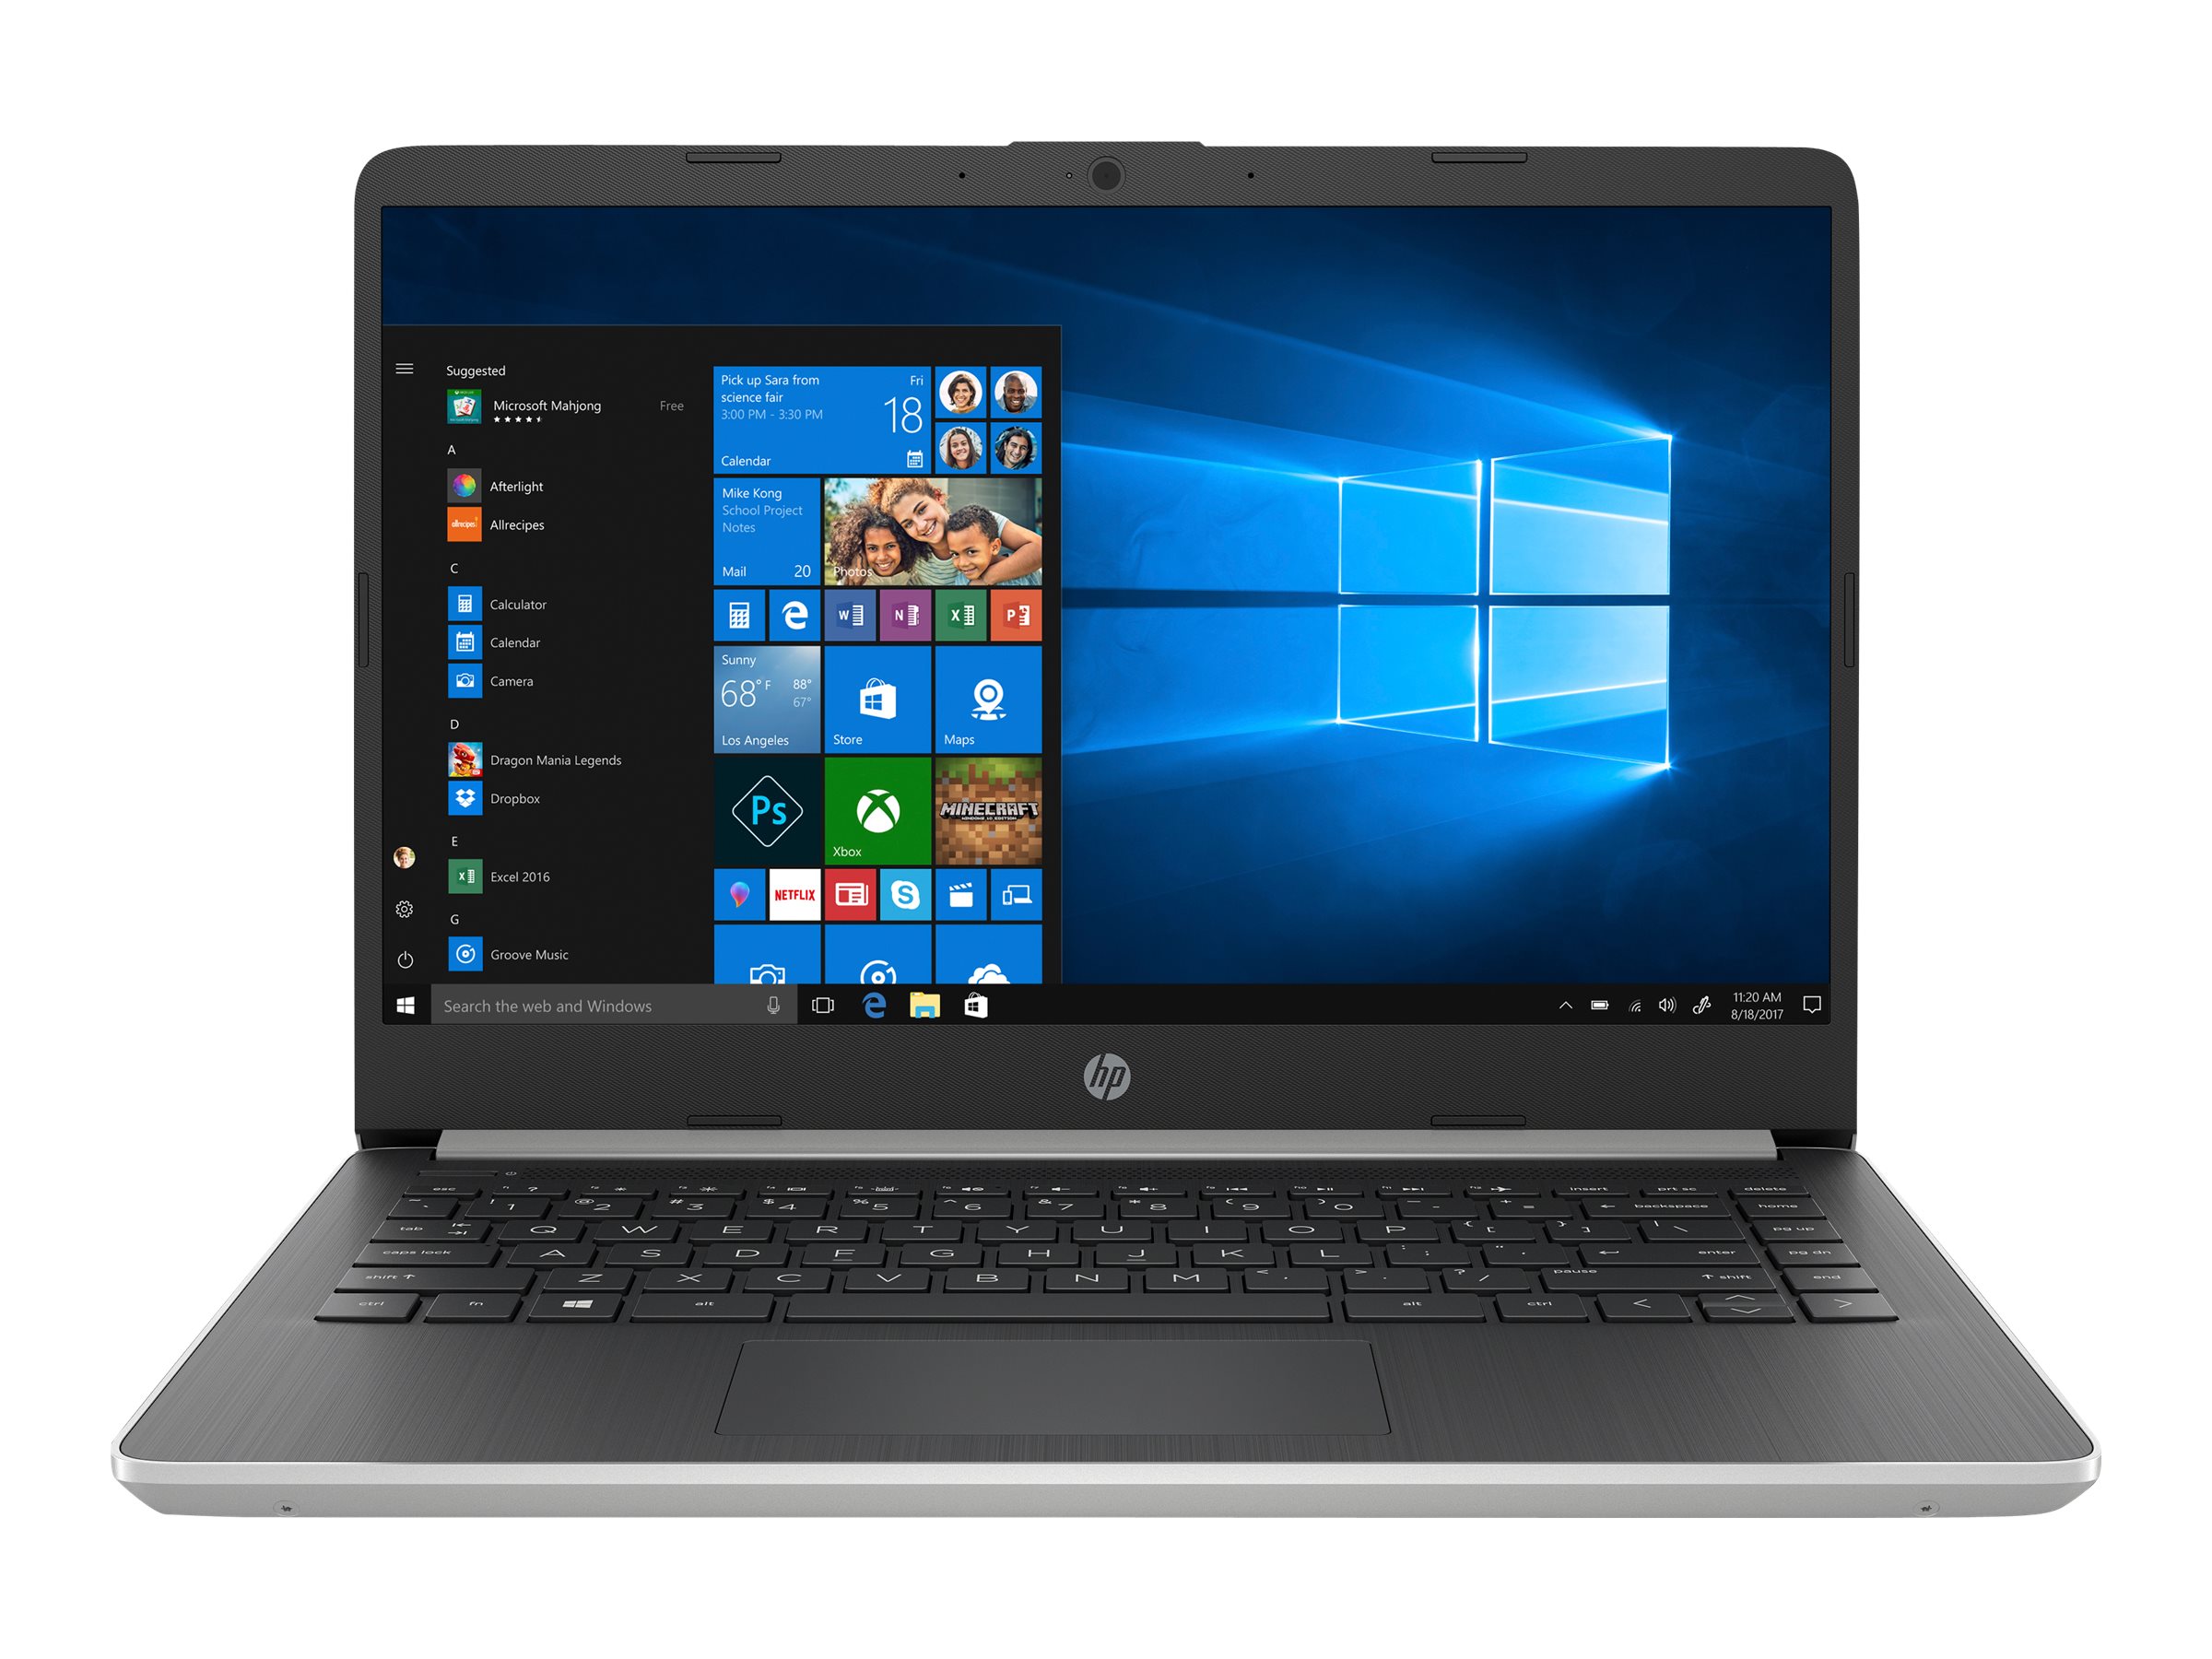 HP 14-dq1039wm 14" HD i5-1035G1 1.0GHz 8GB RAM 256GB SSD Win 10 Home Natural Silver - image 2 of 6